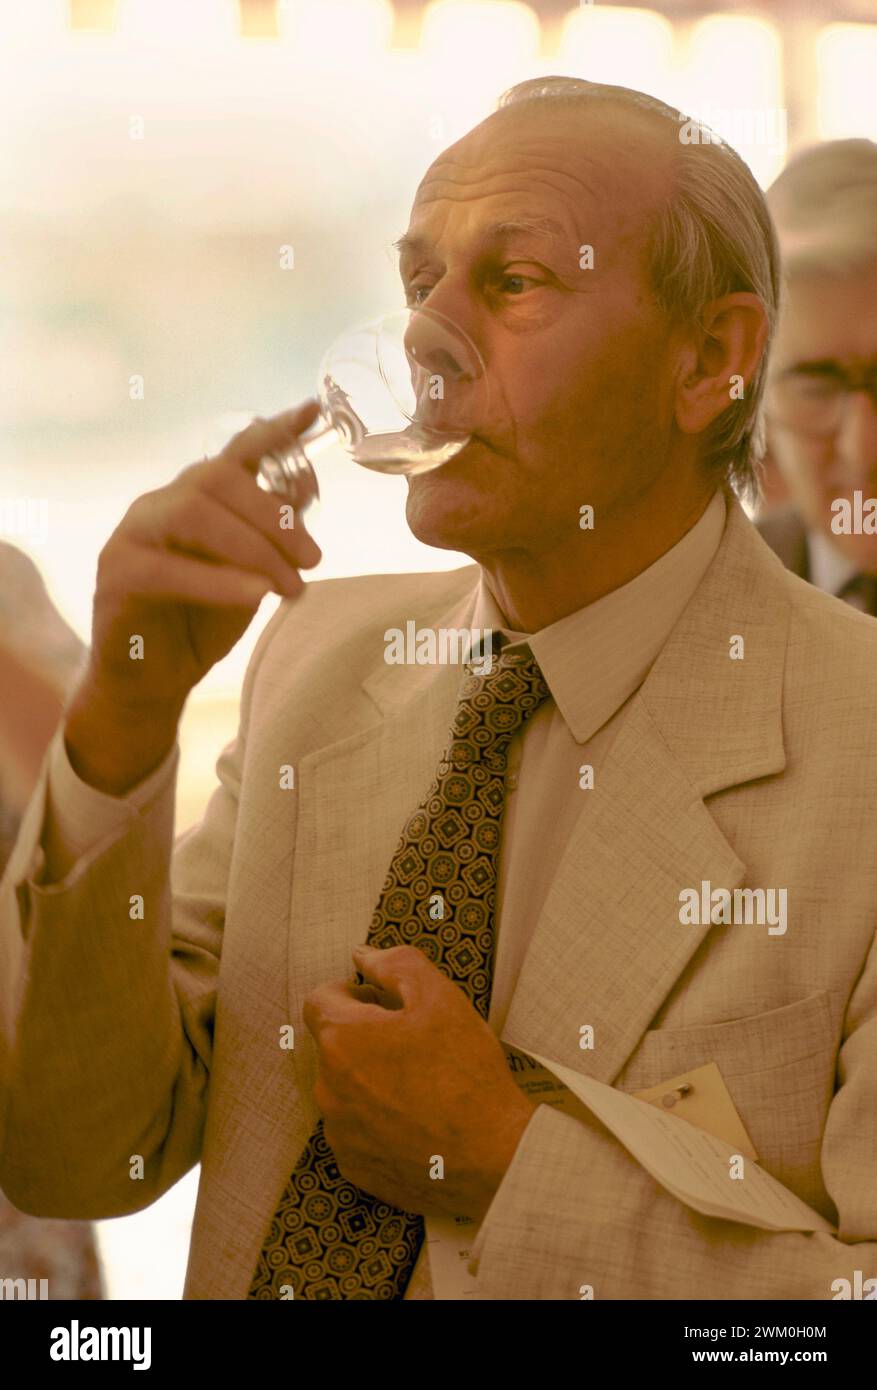 English Vineyard Association, annual wine tasting event. Members tasting different English wines in a marquee set up on the Members Terrace at the House of Lords, London Uk 1989 1980s HOMER SYKES Stock Photo